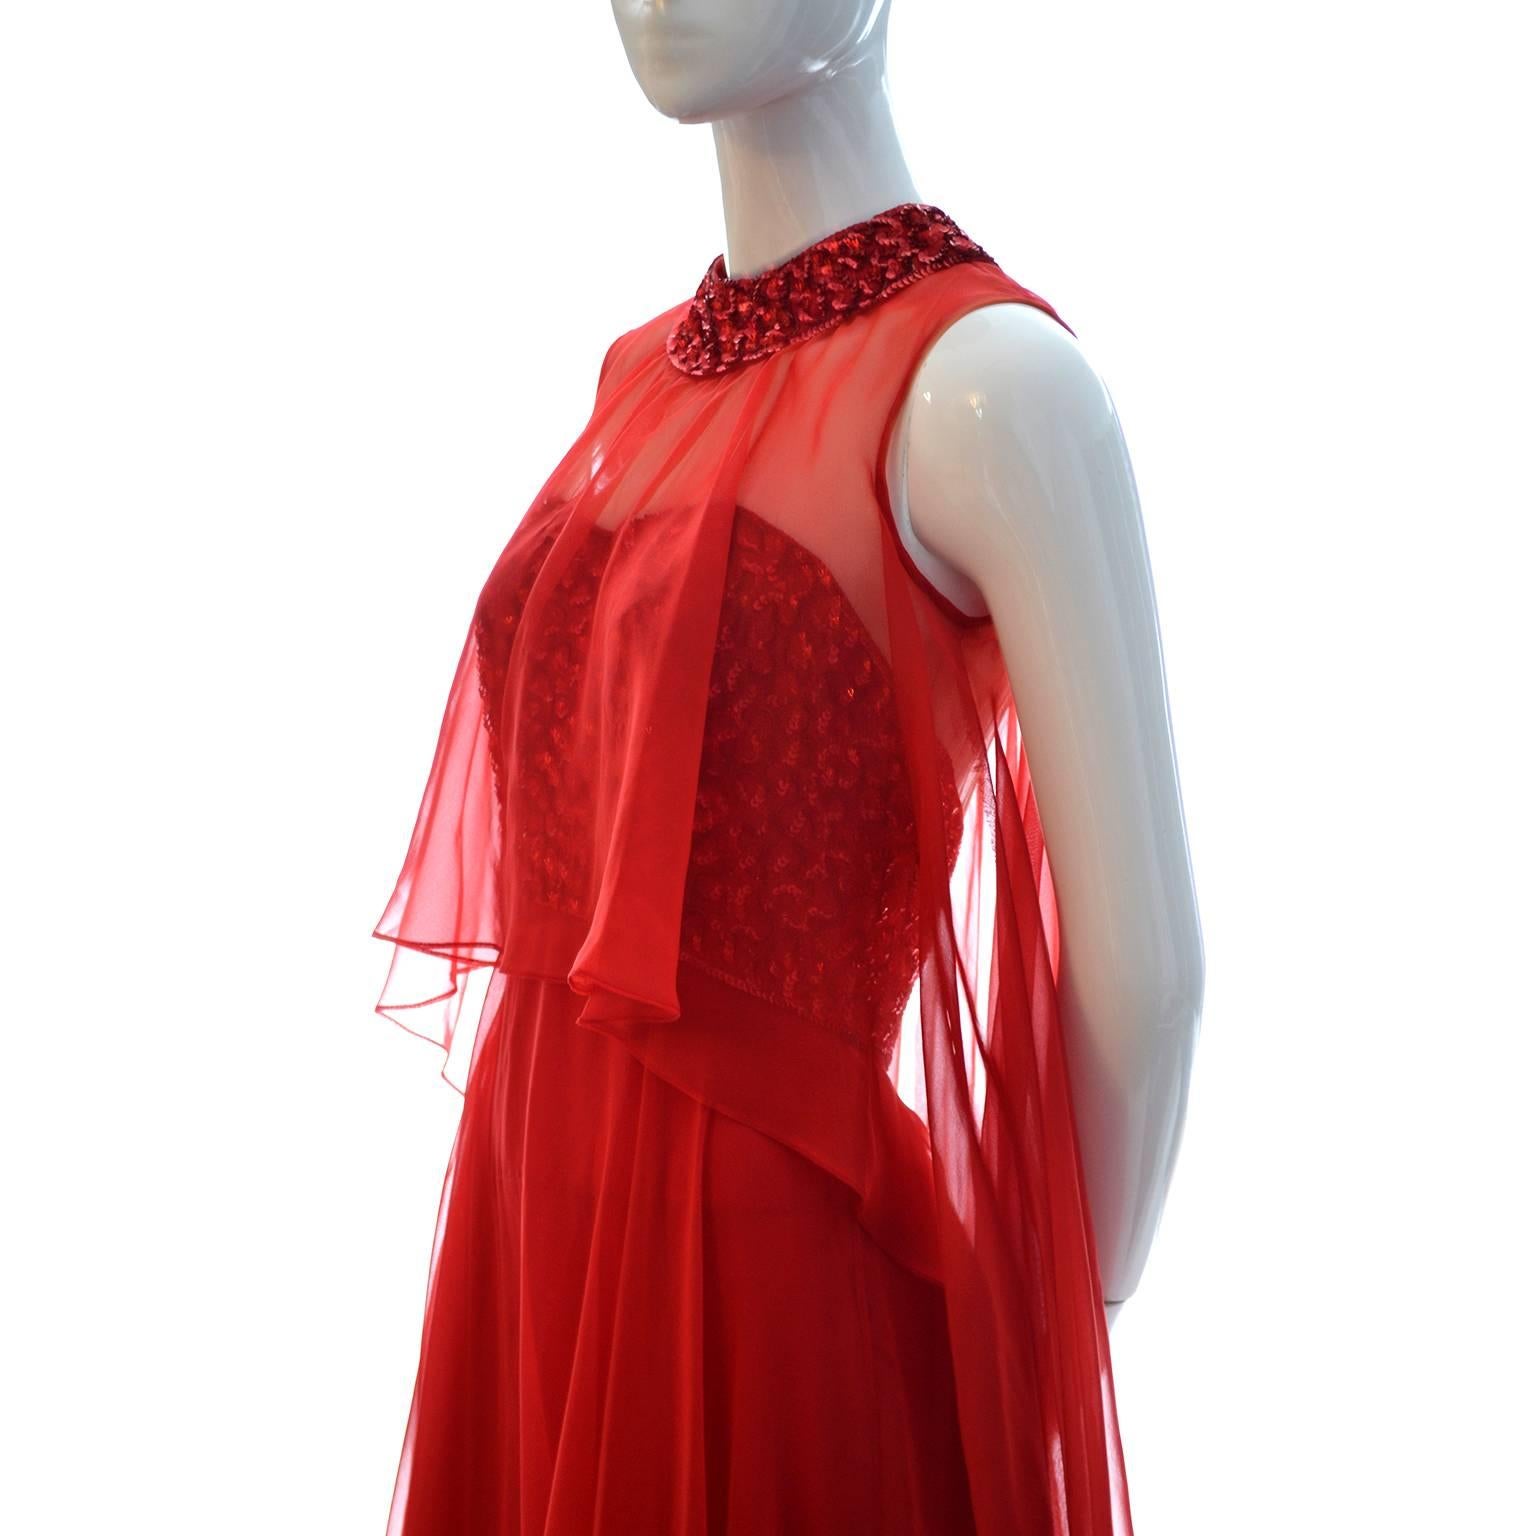 1970s Mike Benet Vintage Dress in Lipstick Red With Sequins & Sheer Overlay 4